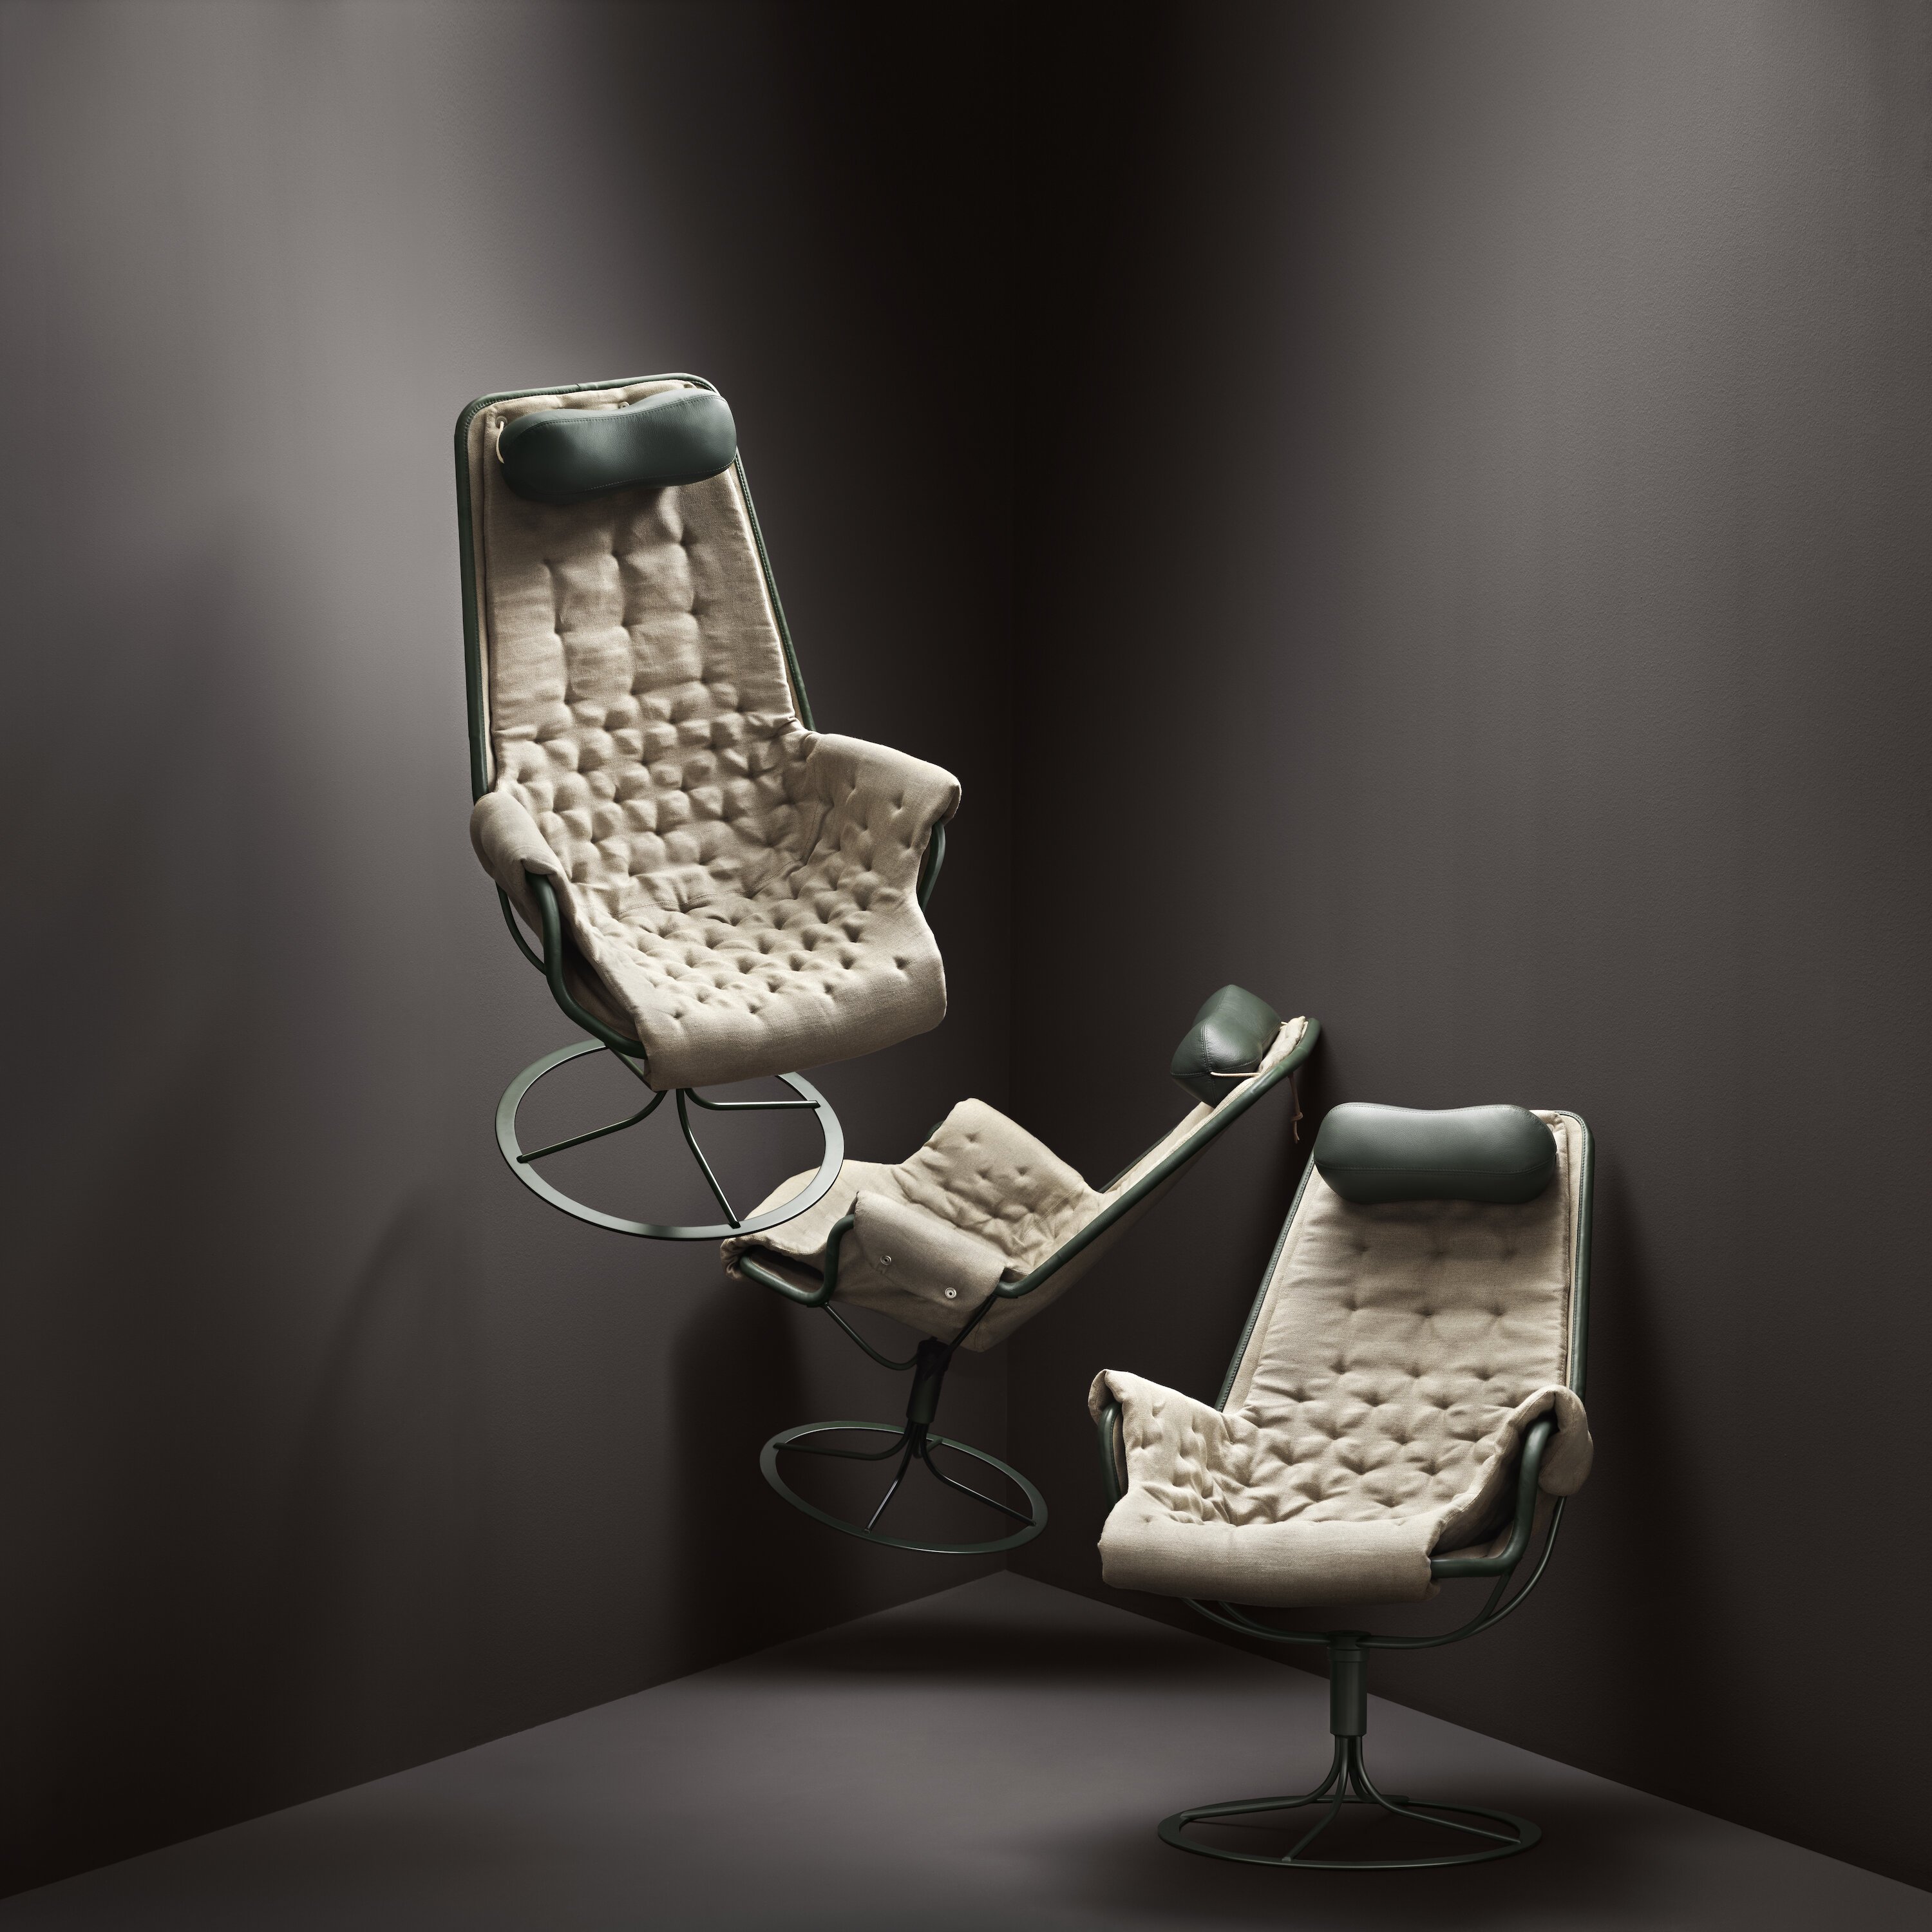 The iconic Jetson Chair by Burno Mathsson